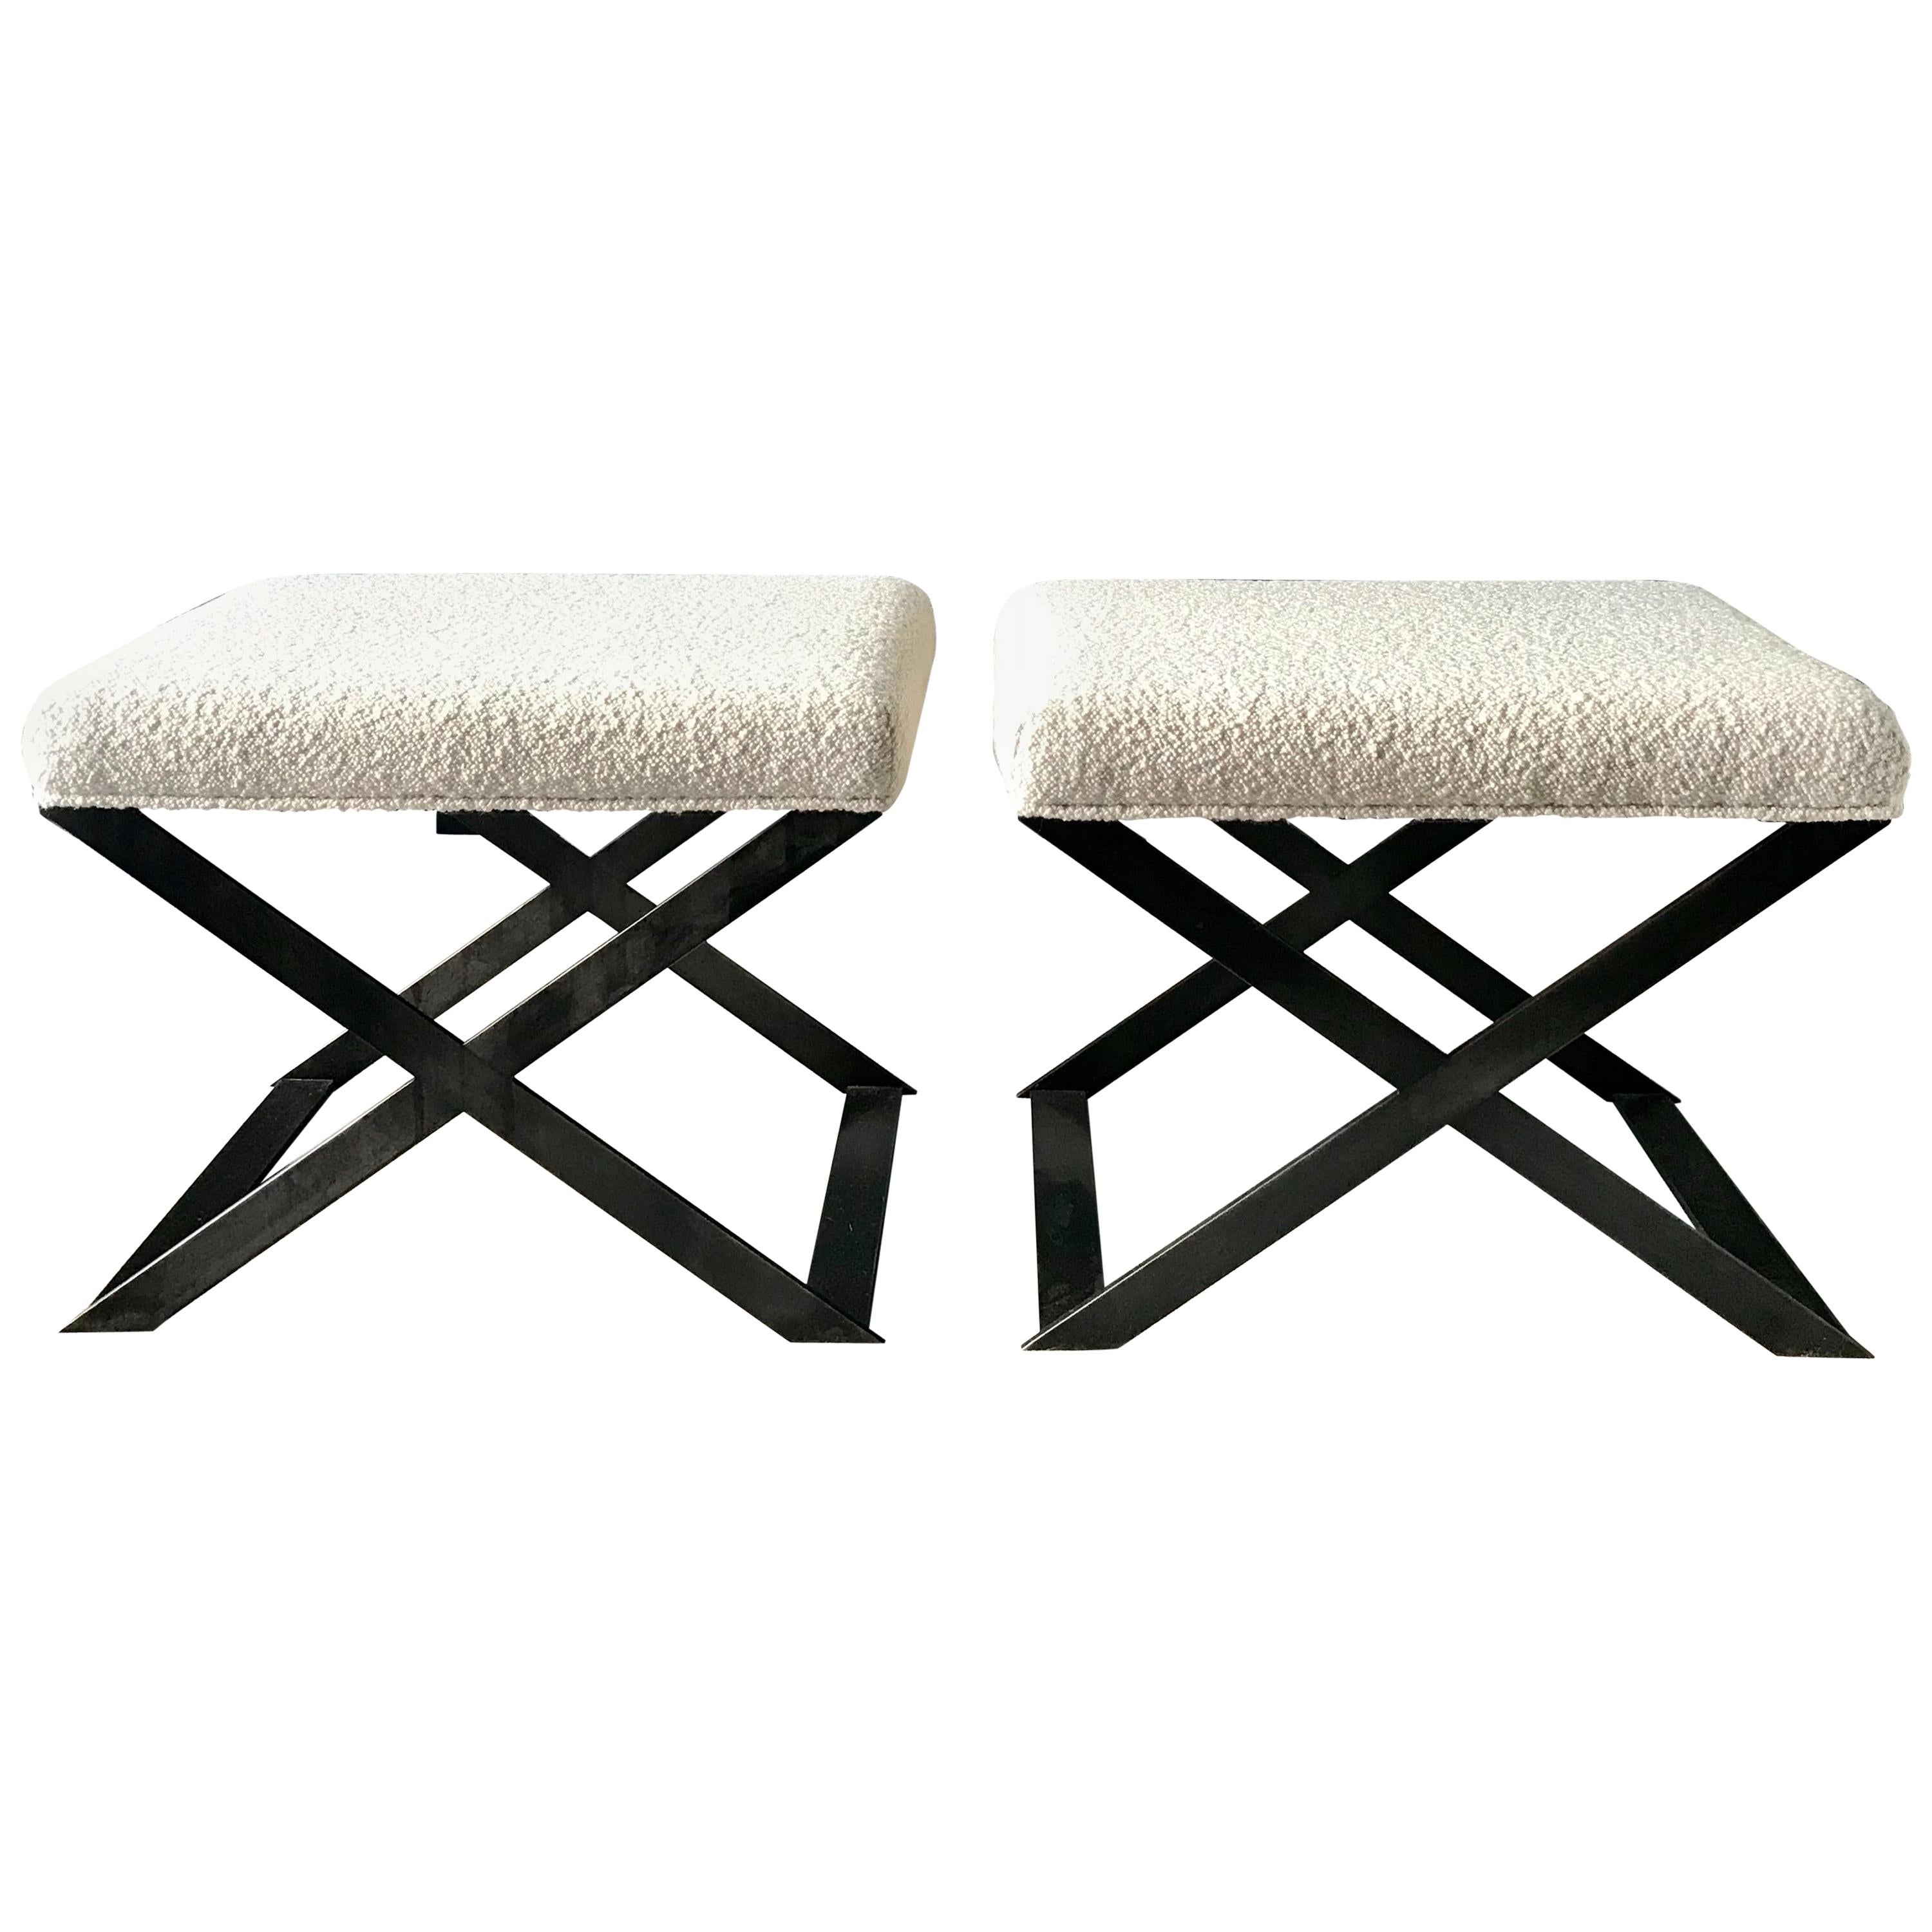 Industrial Glamour Inspired X-Leg Stool in Blackened Steel and Bouclé Fabric